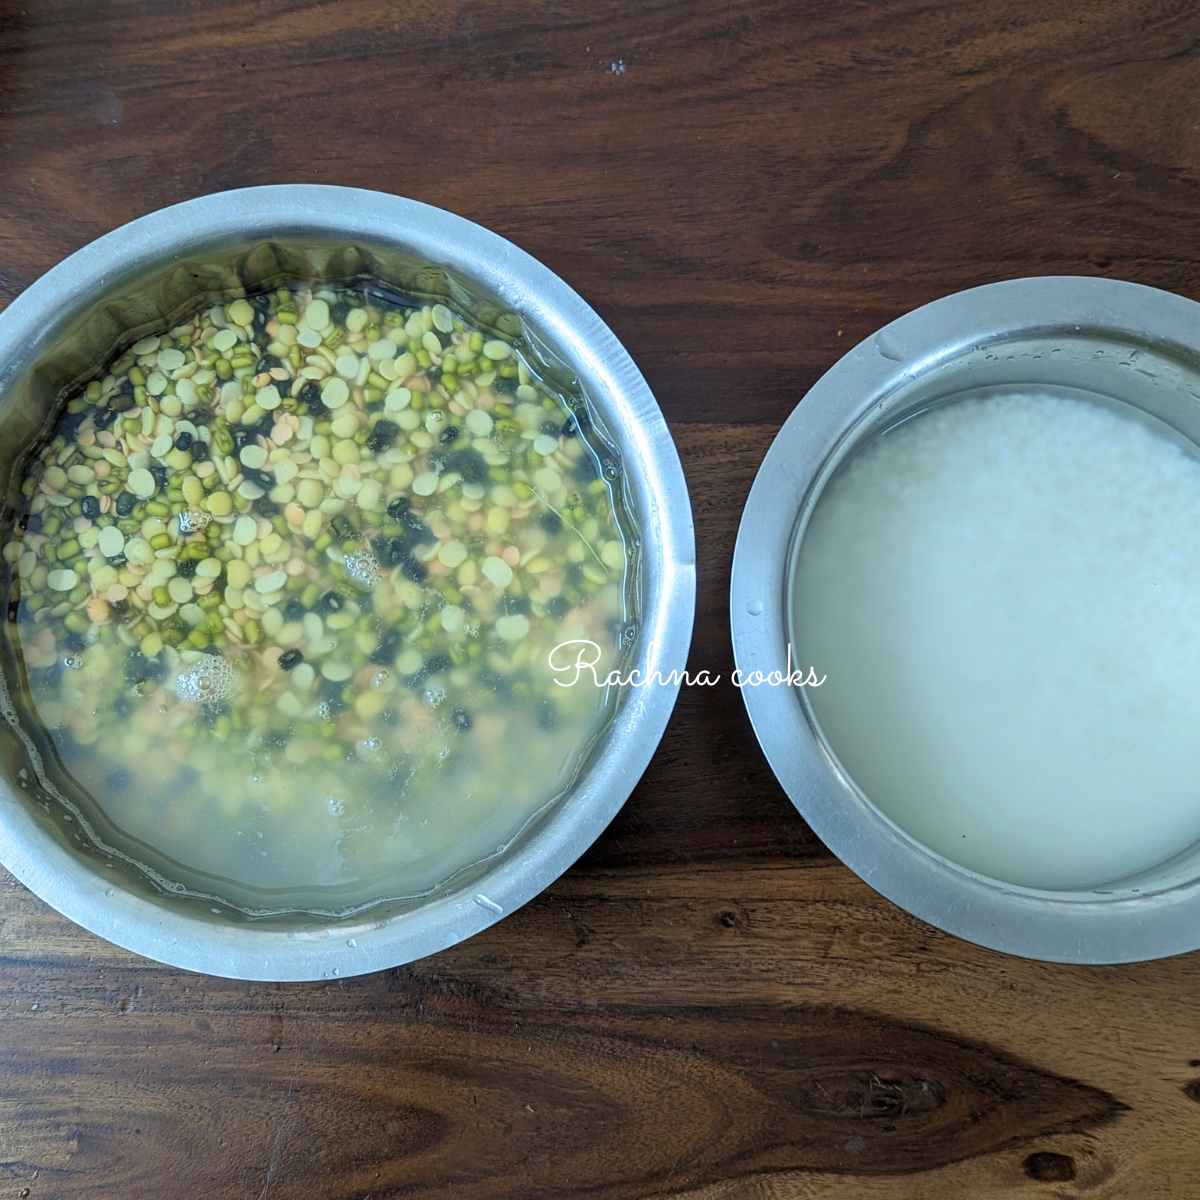 Soaked lentils and rice in two bowls